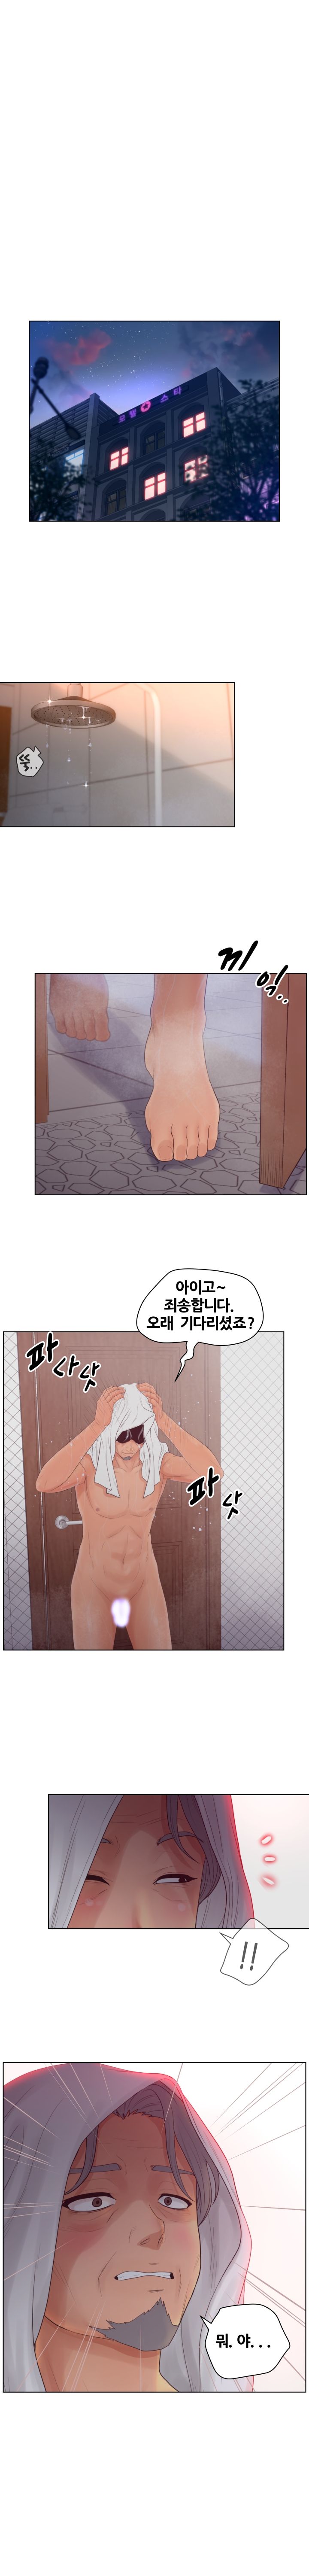 Share Girls Raw - Chapter 18 Page 1